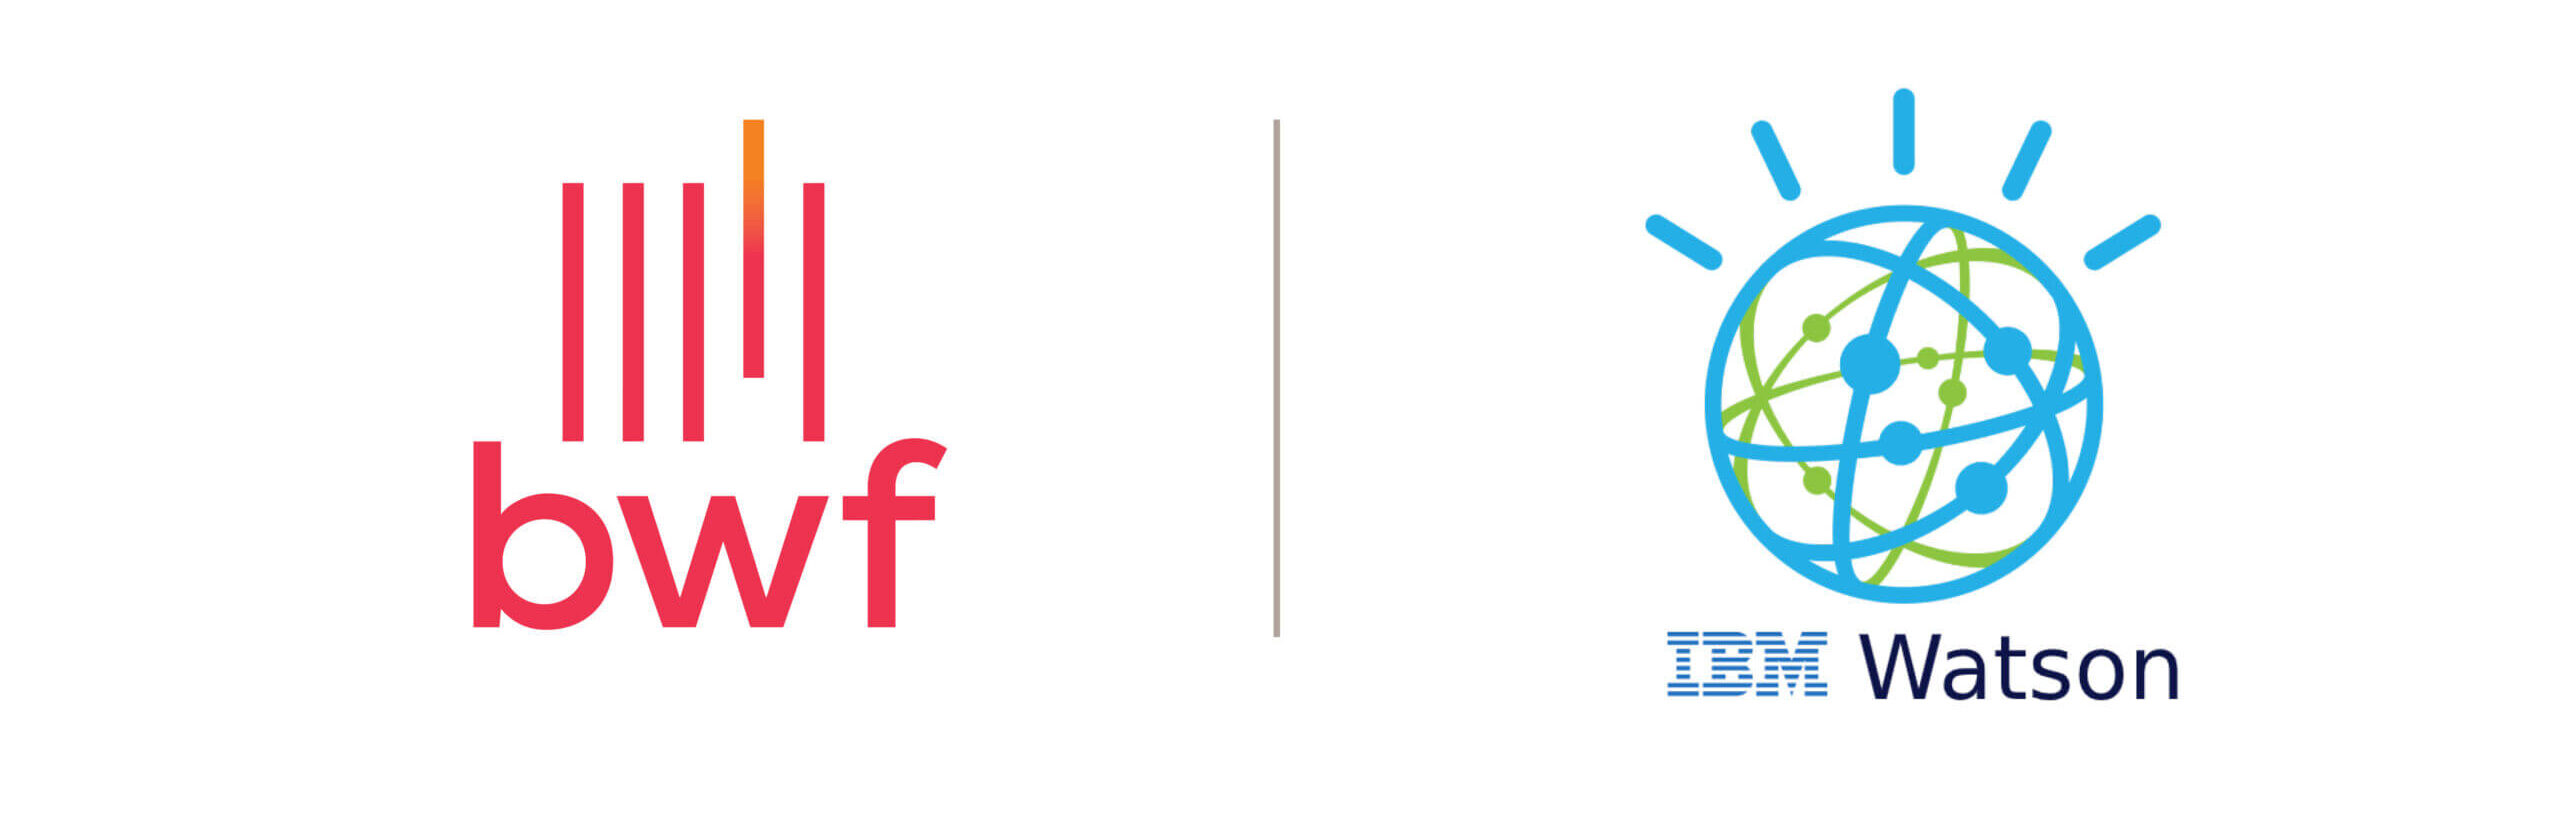 Image showing the BWF and IBM Watson logos side by side